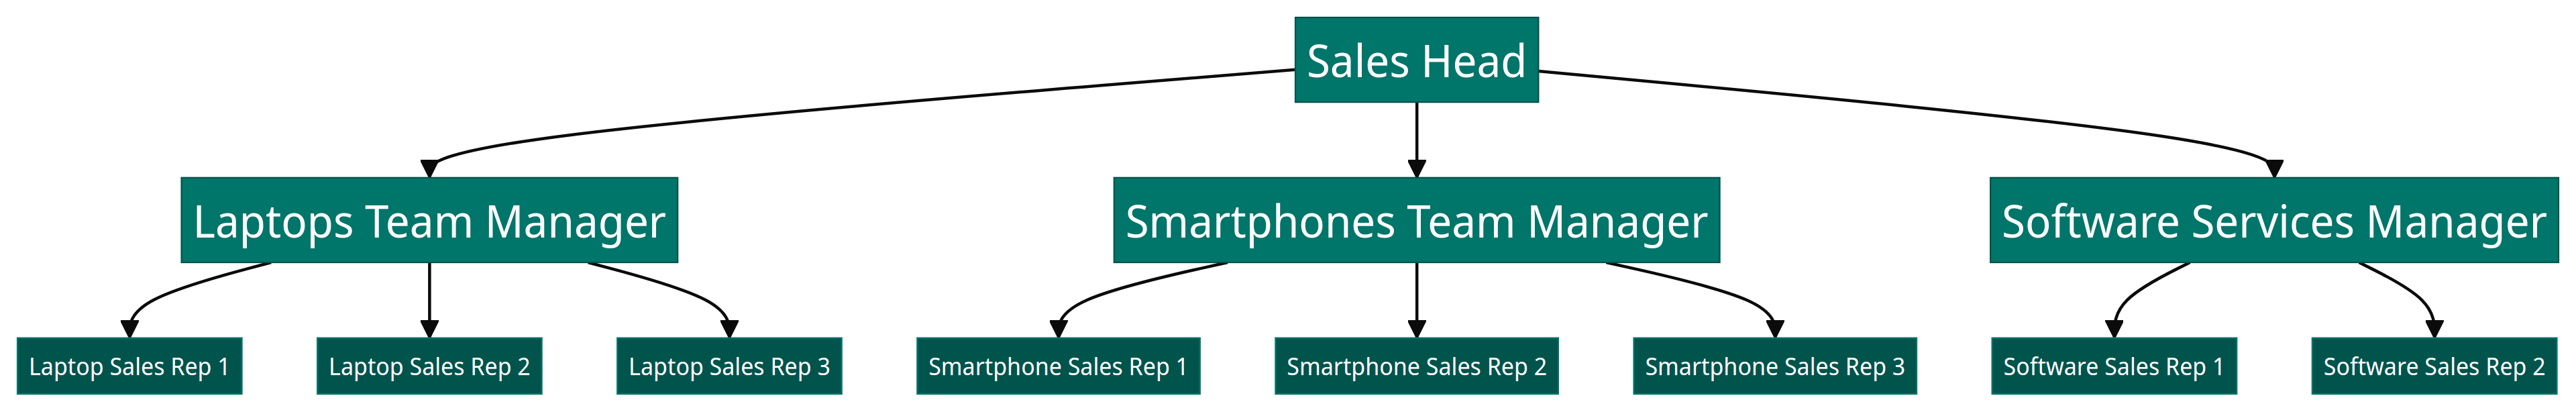 Product sales team structure